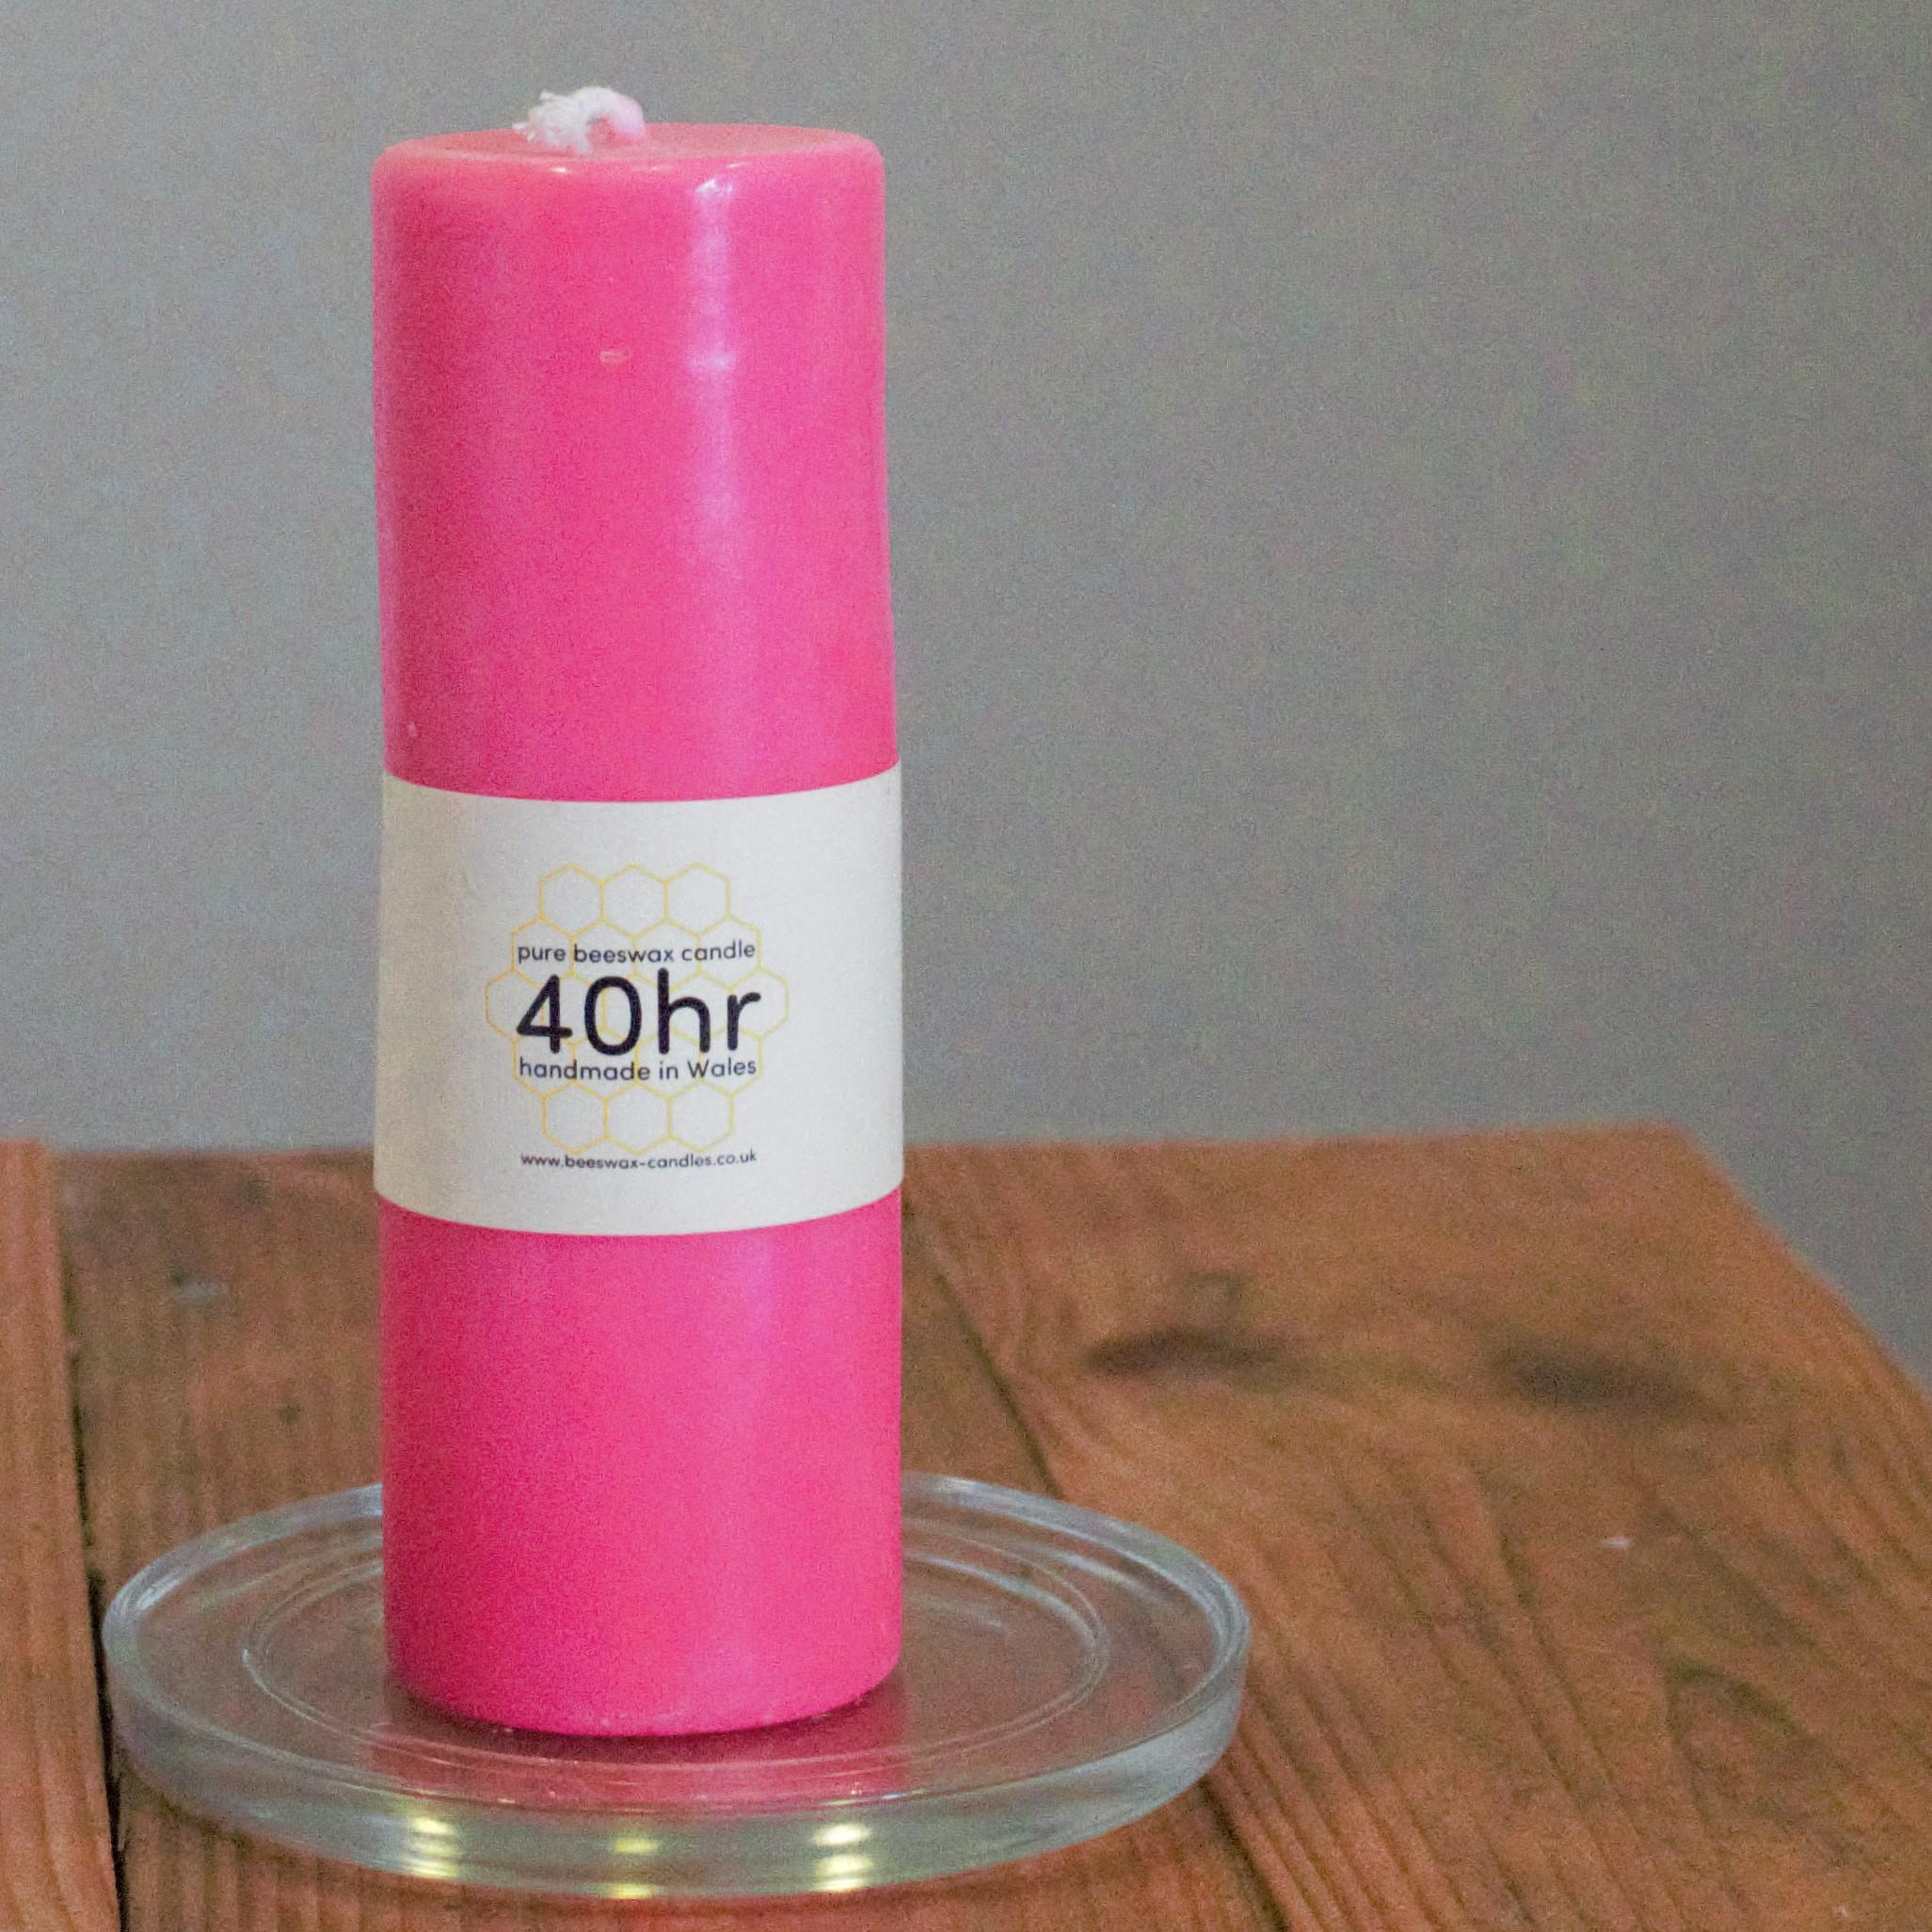 Hot pink 40hr pure beeswax pillar candle